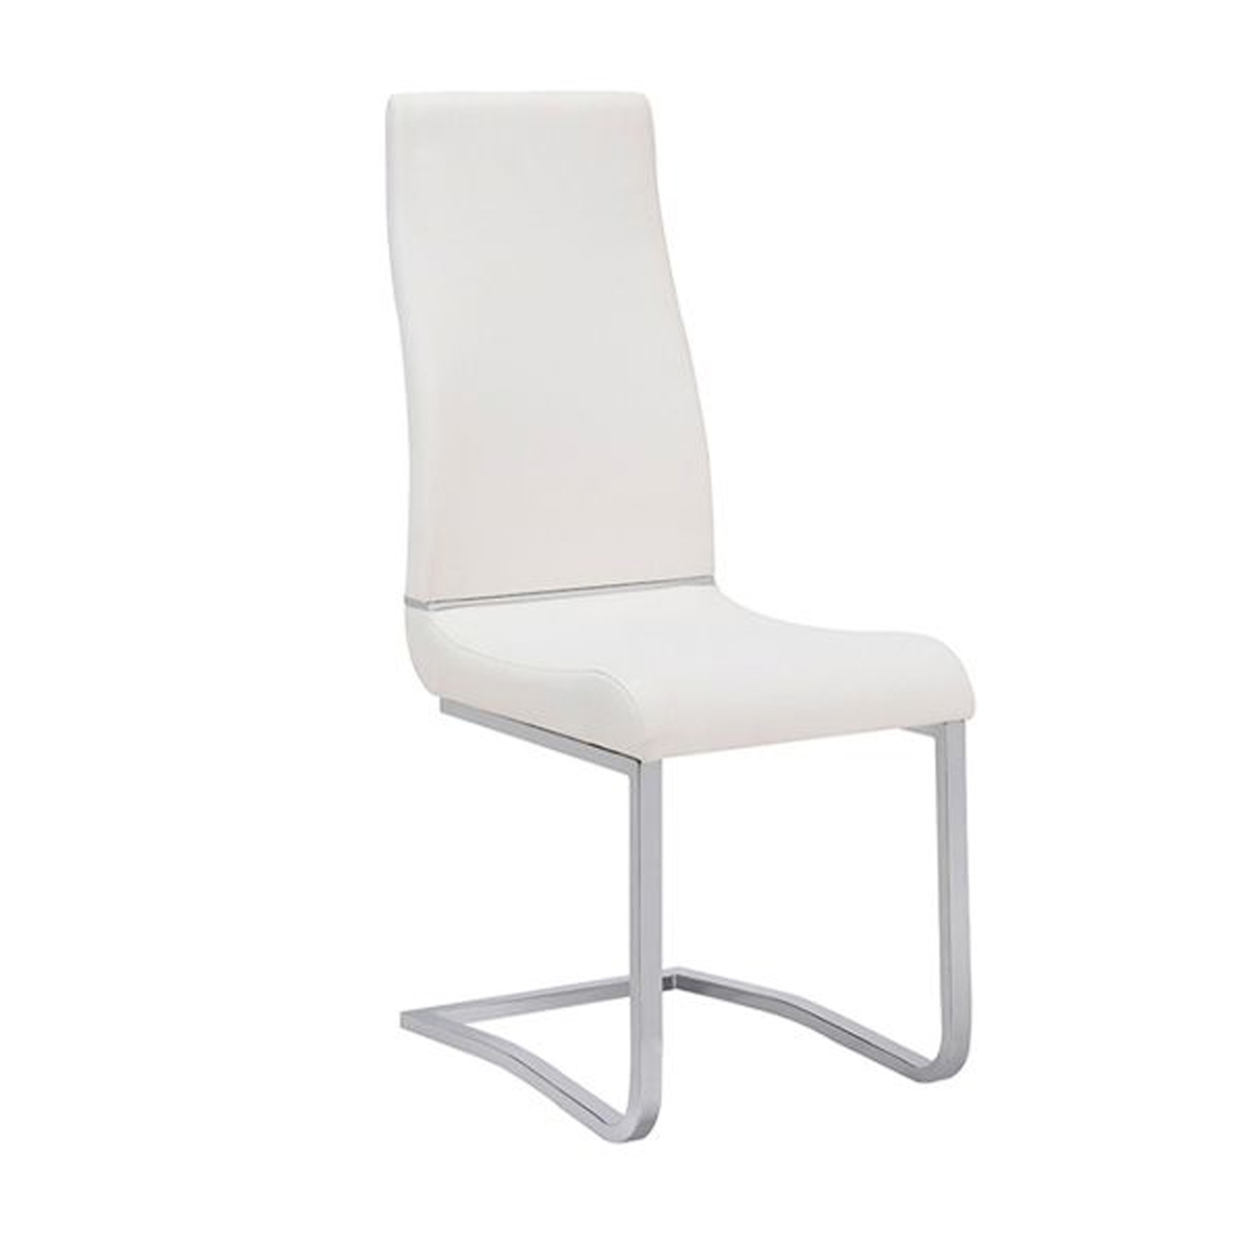 Stainless Steel Chair With Faux Leather Upholstery, Set Of Two, White And Silver- Saltoro Sherpi